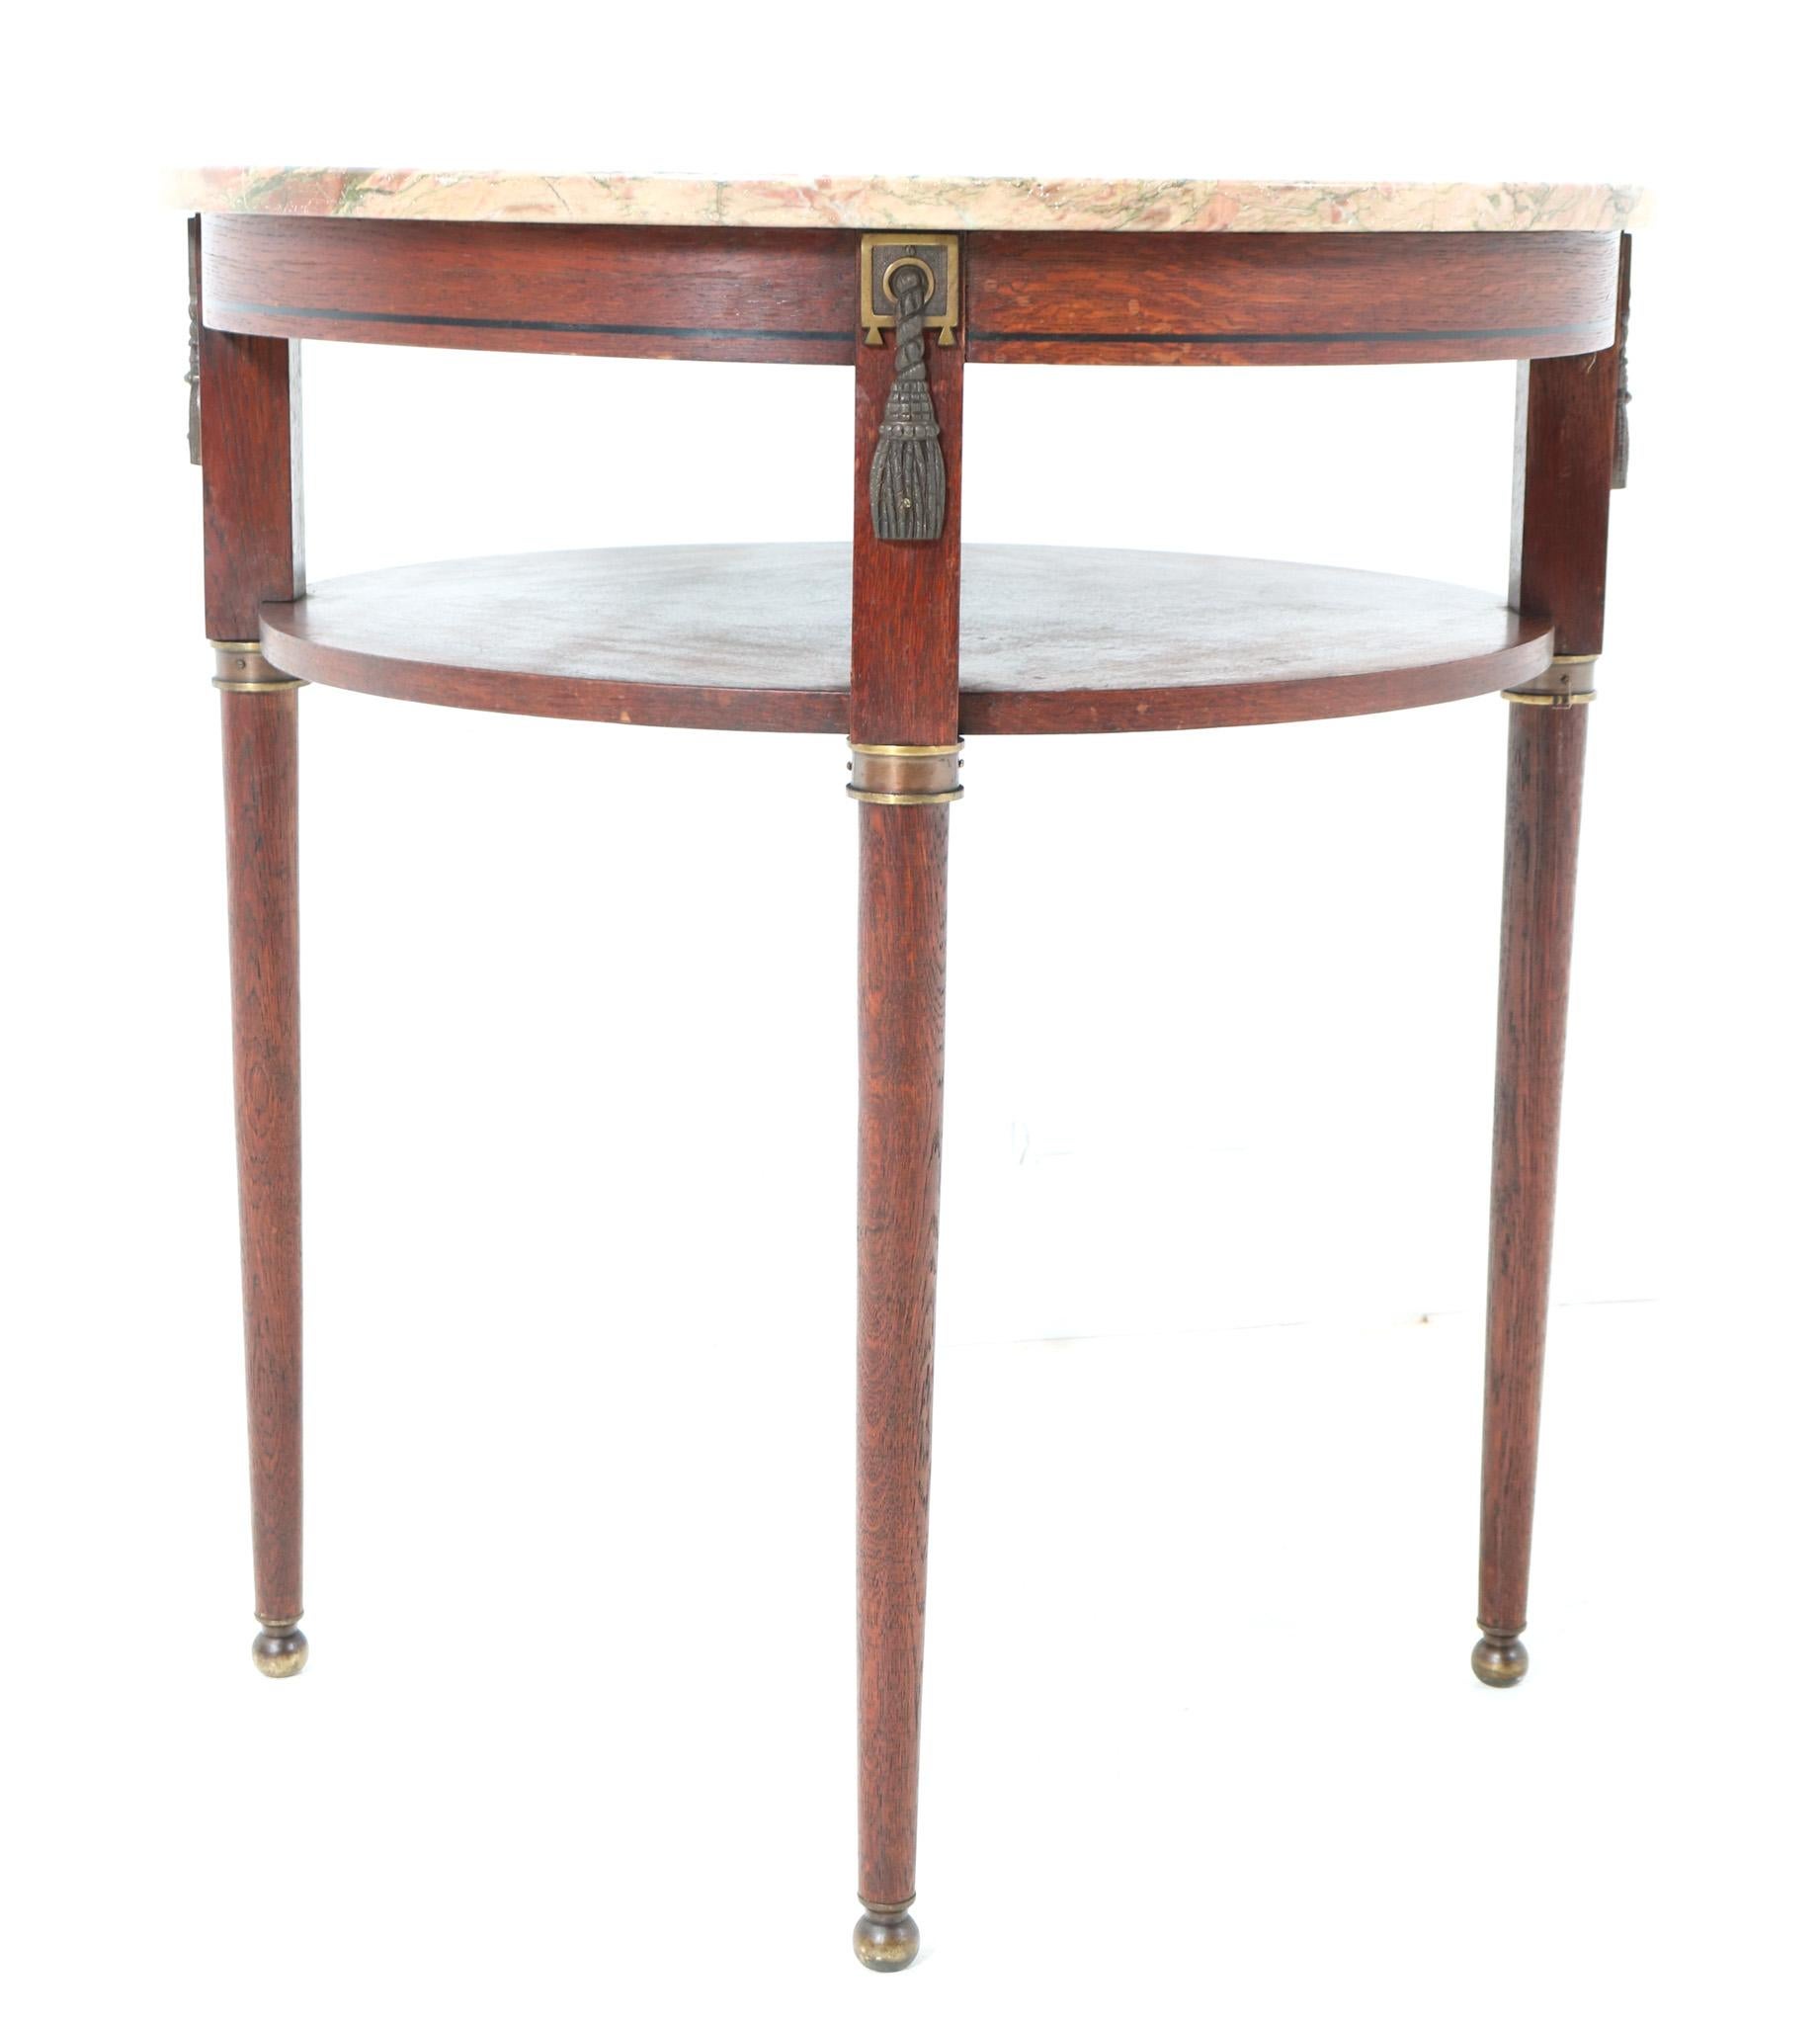 Mid-20th Century French Oak Art Deco Side Table with Marble Top, 1930s For Sale